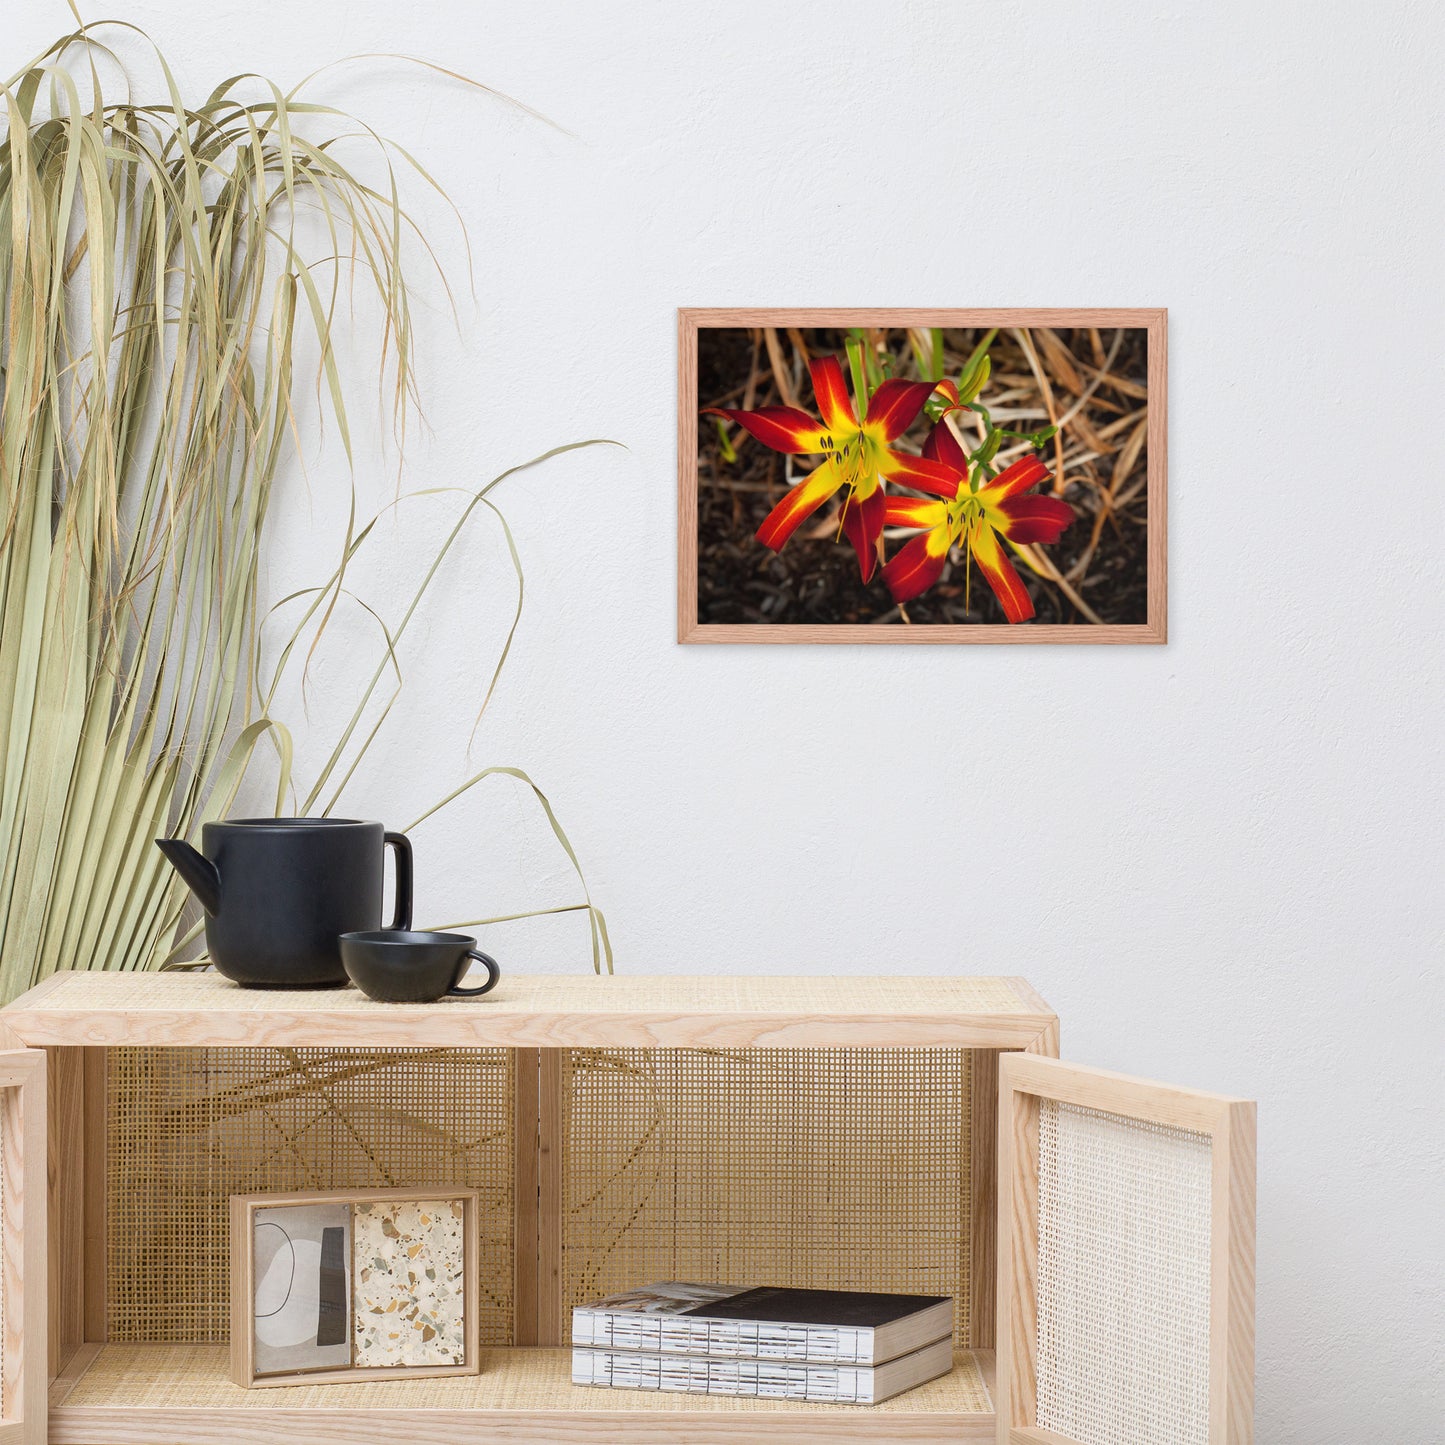 Royal Sunset Lily Floral Nature Photo Framed Wall Art Print